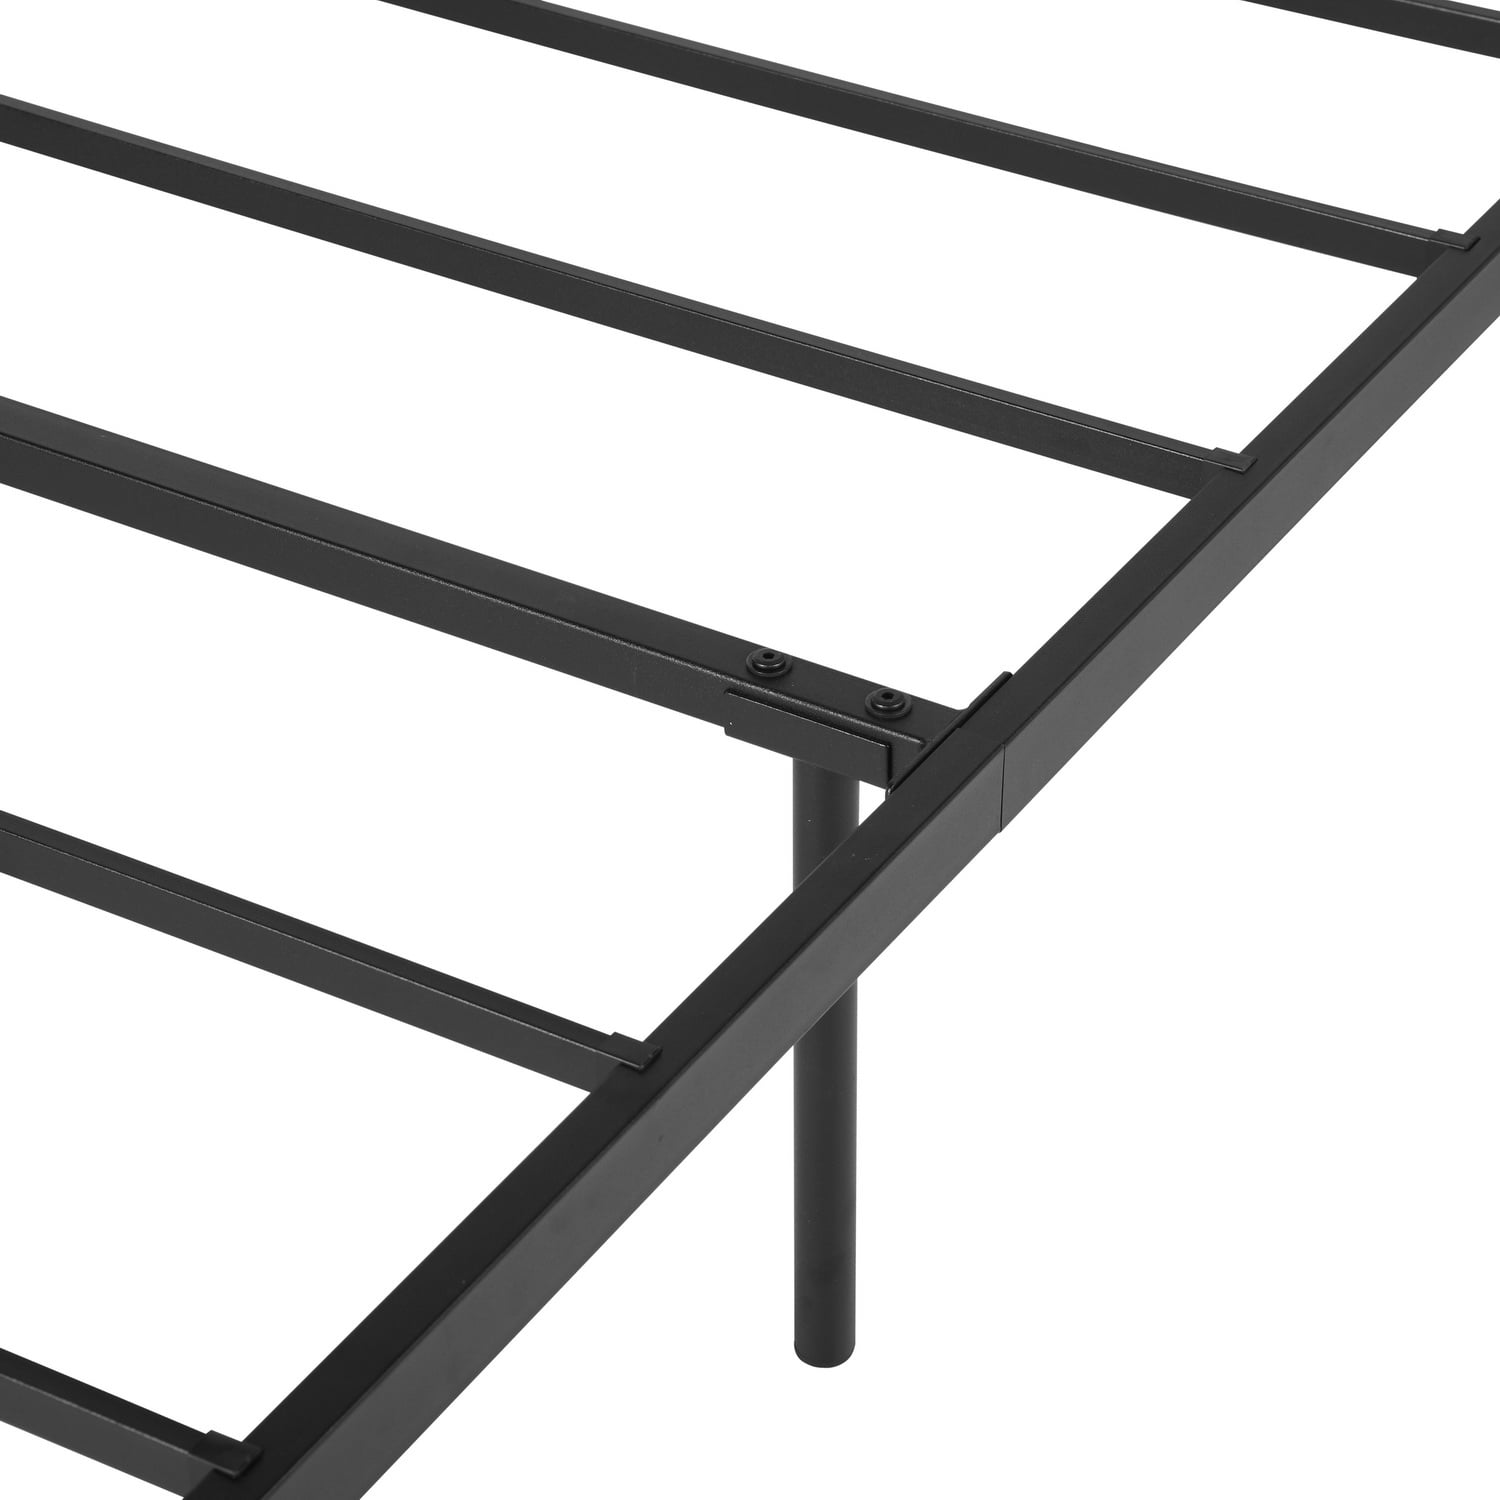 Smiaoer Full Size Metal Platform Bed Frame with Headboard and Footboard, No Box Spring Needed